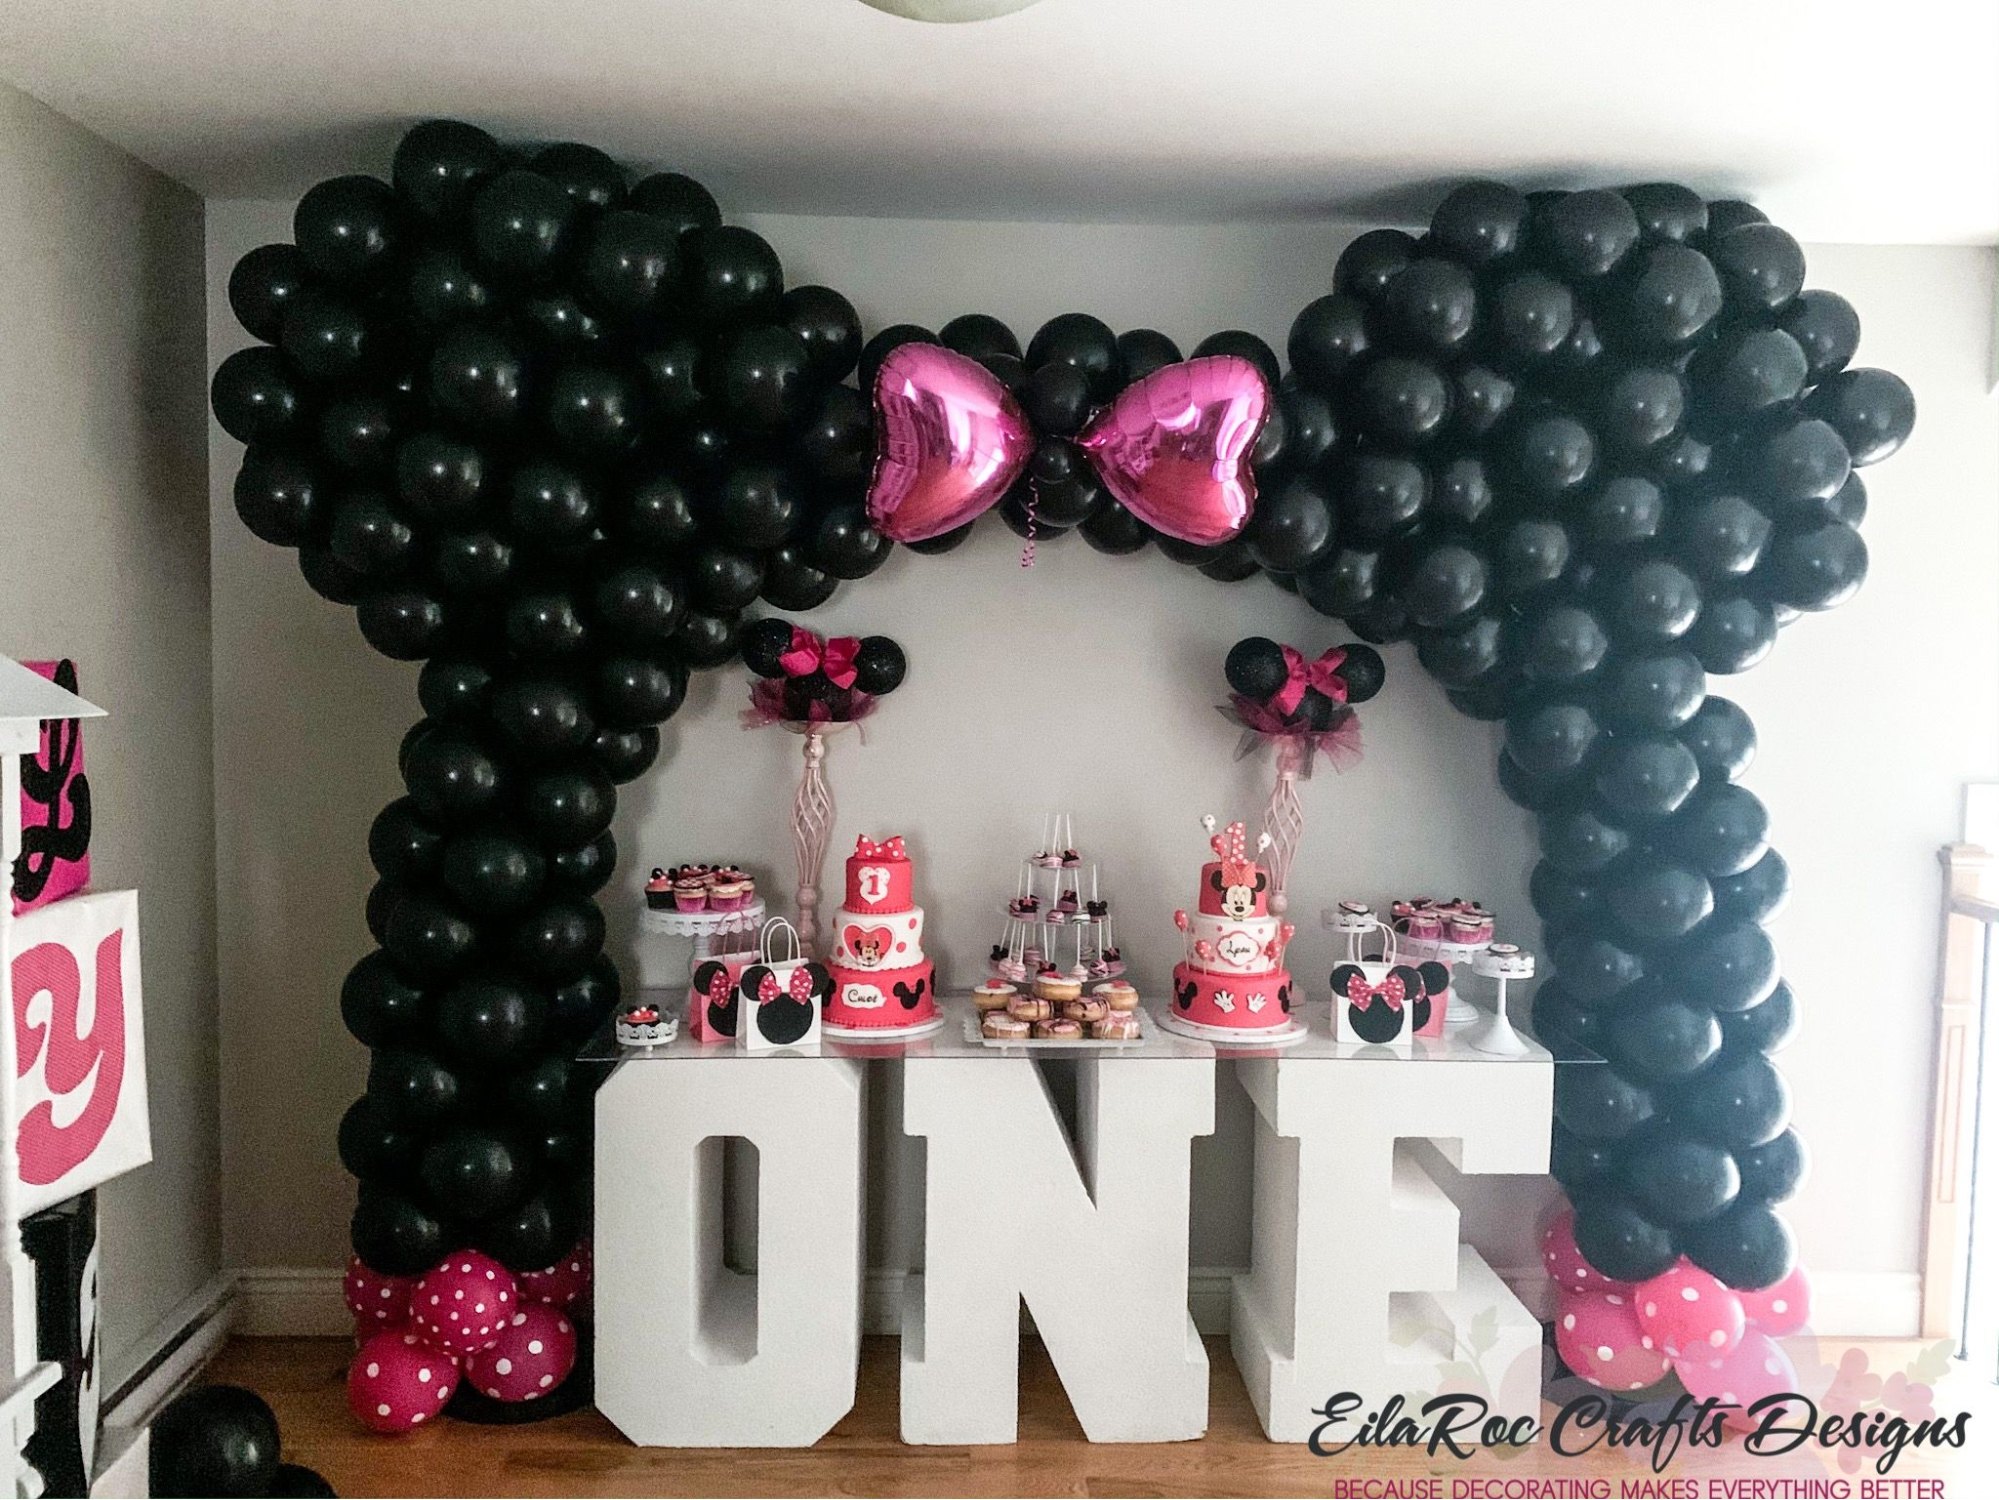 Minnie-mouse-themed birthday party balloon arch 